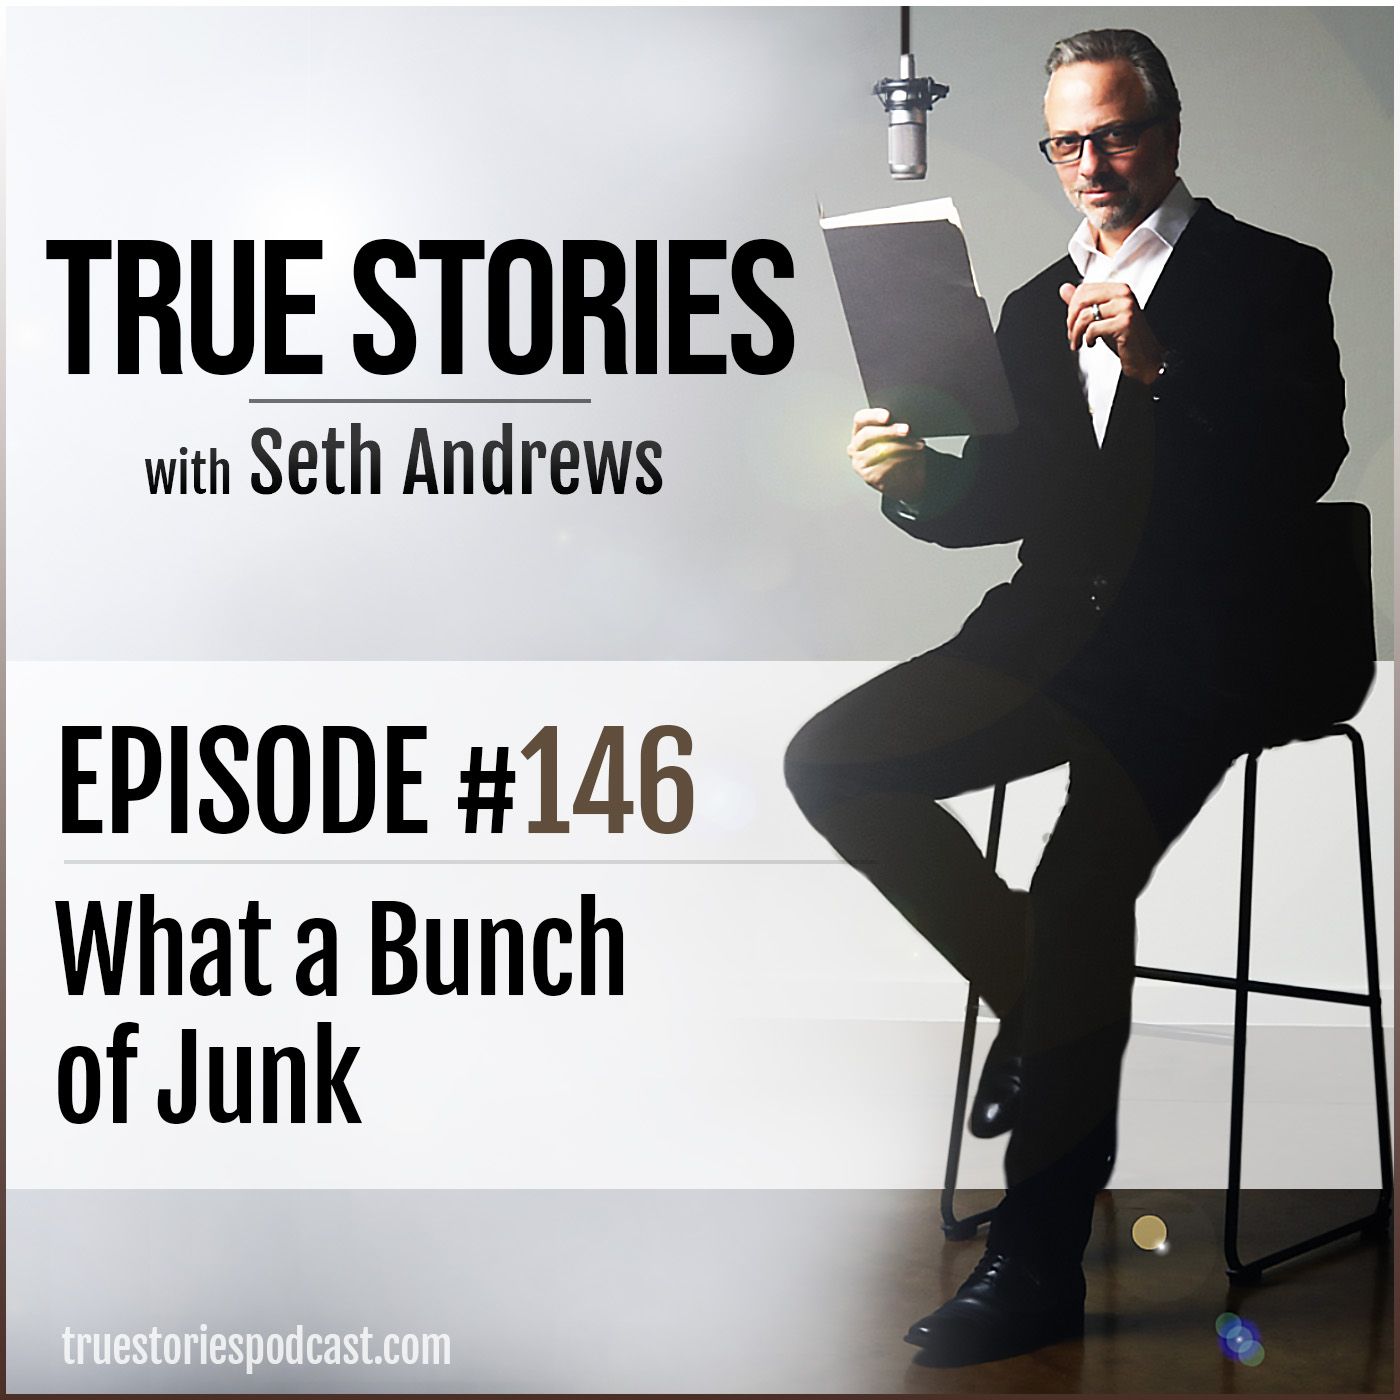 True Stories #146 - What a Bunch of Junk